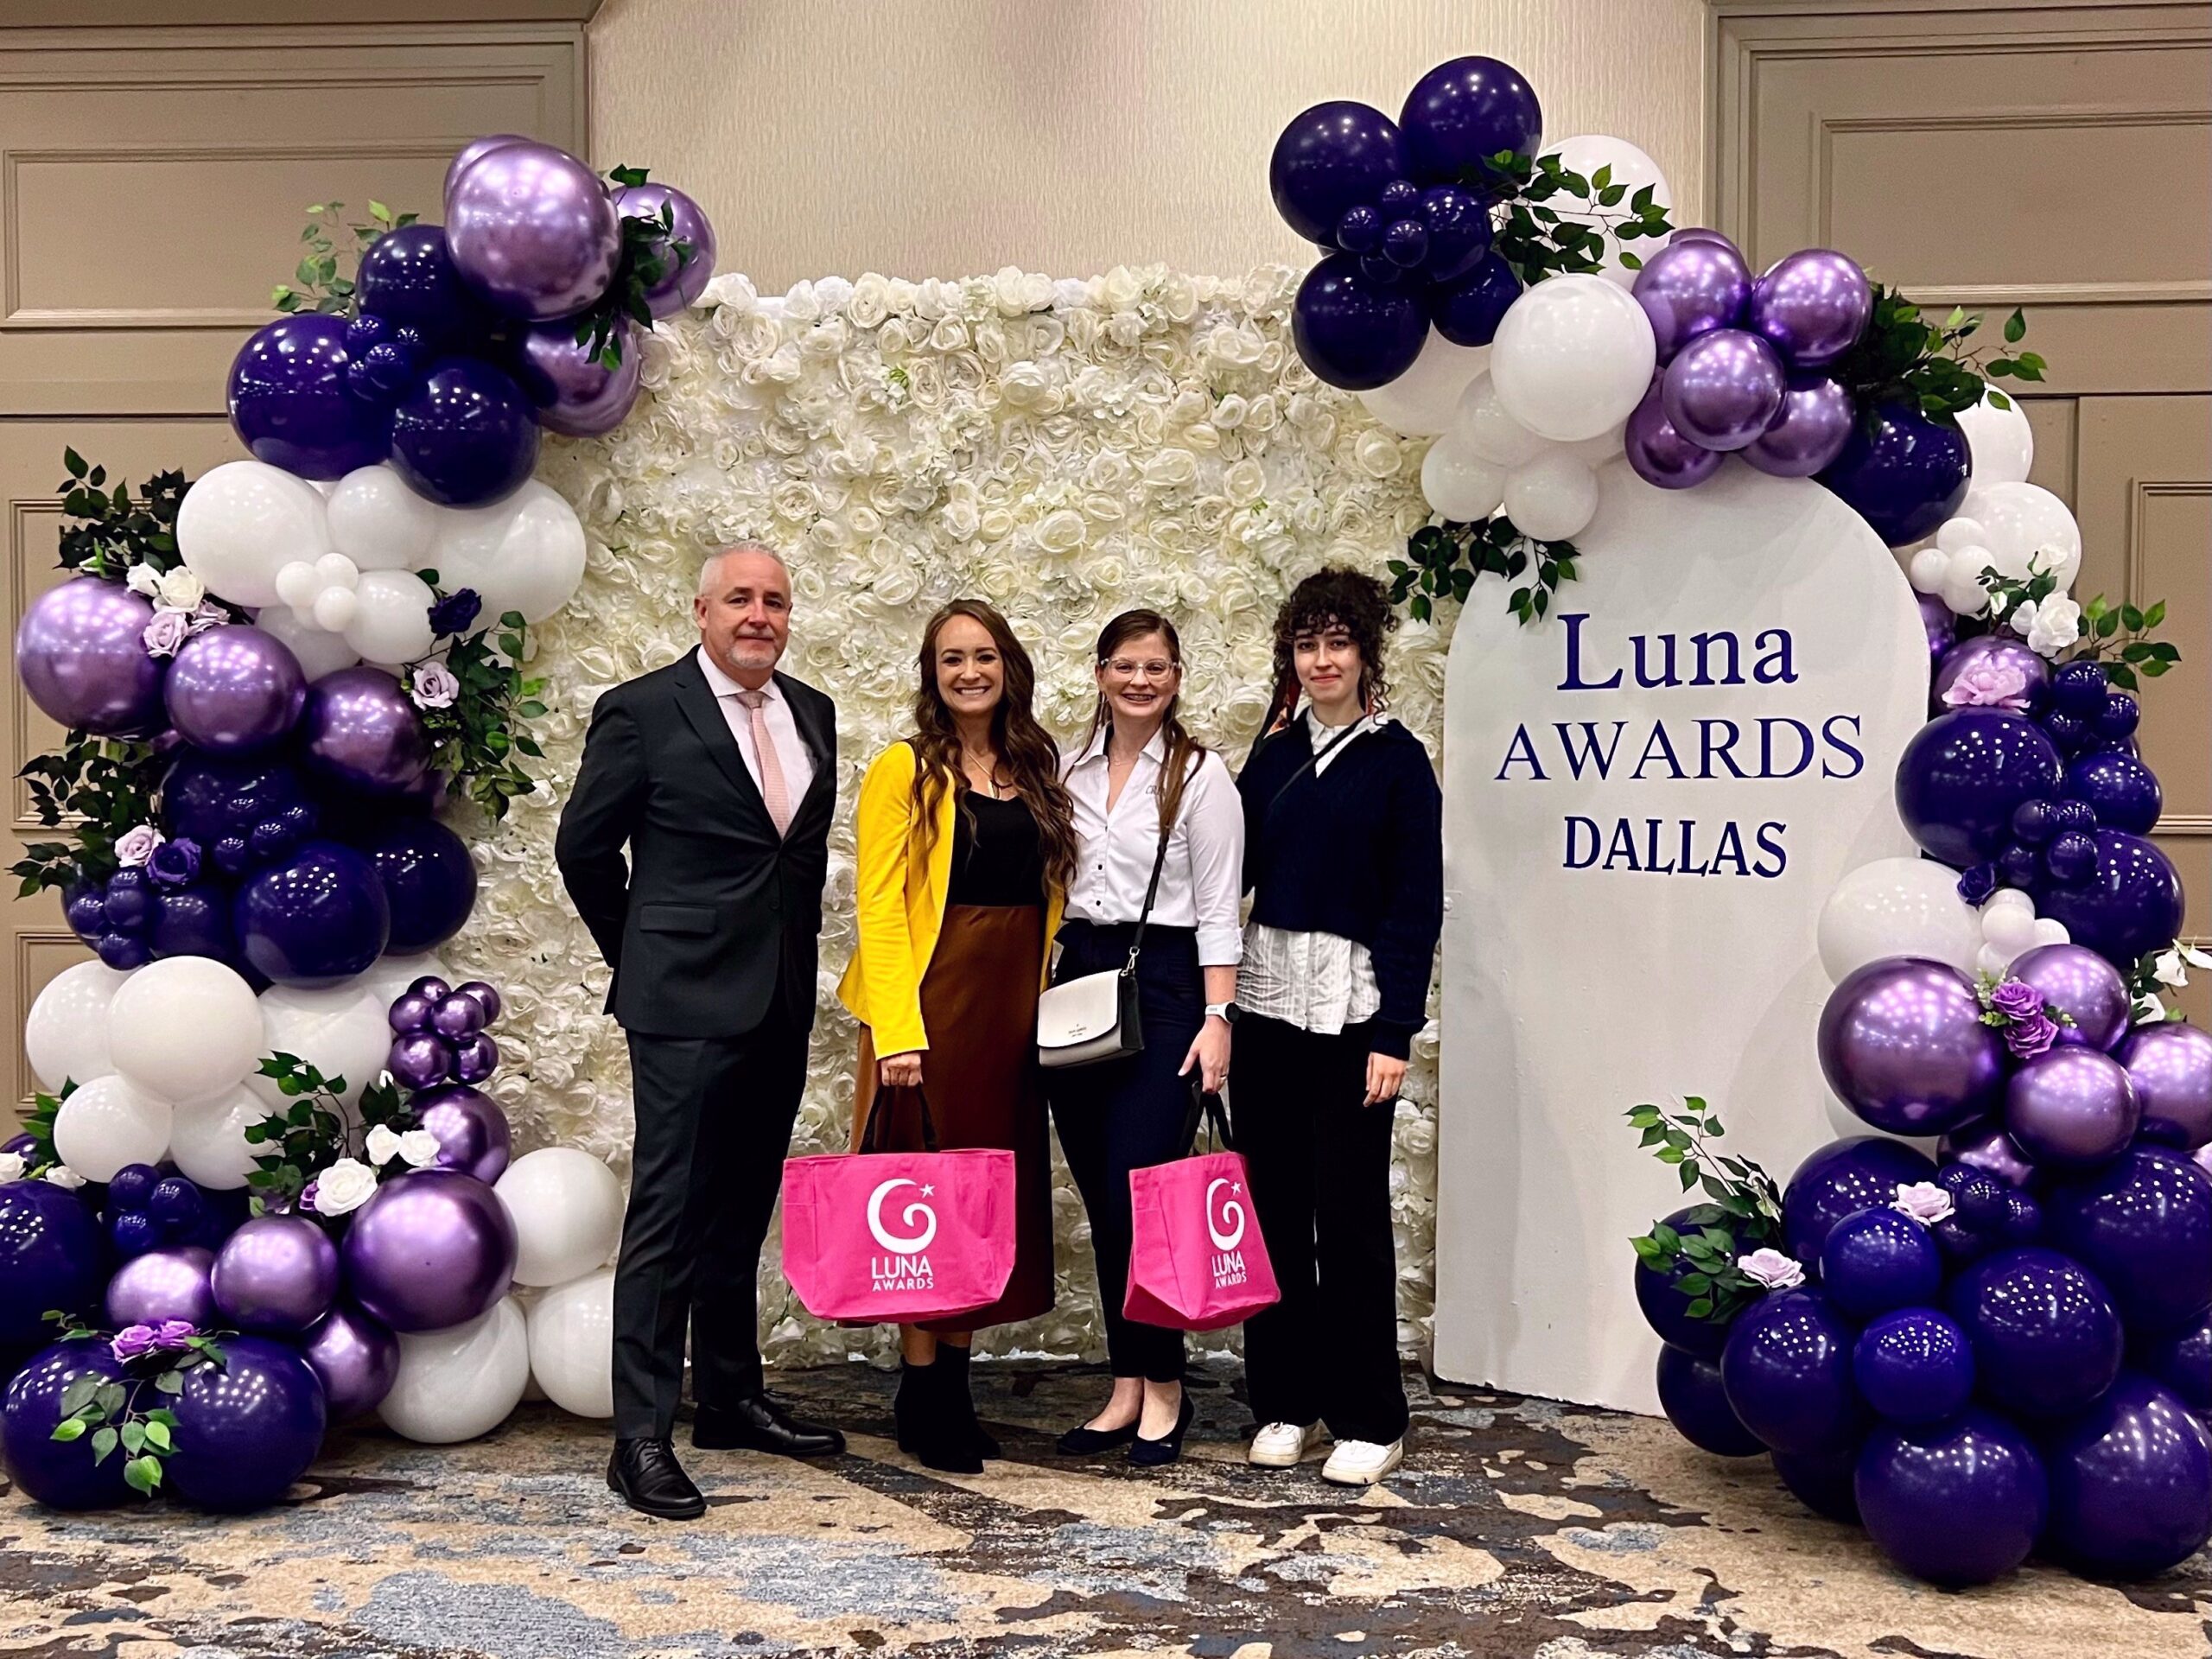 Luna Awards with Rusty Wolff (L-R), Dana Giffords, Hilary Cade, and Roya Payberah